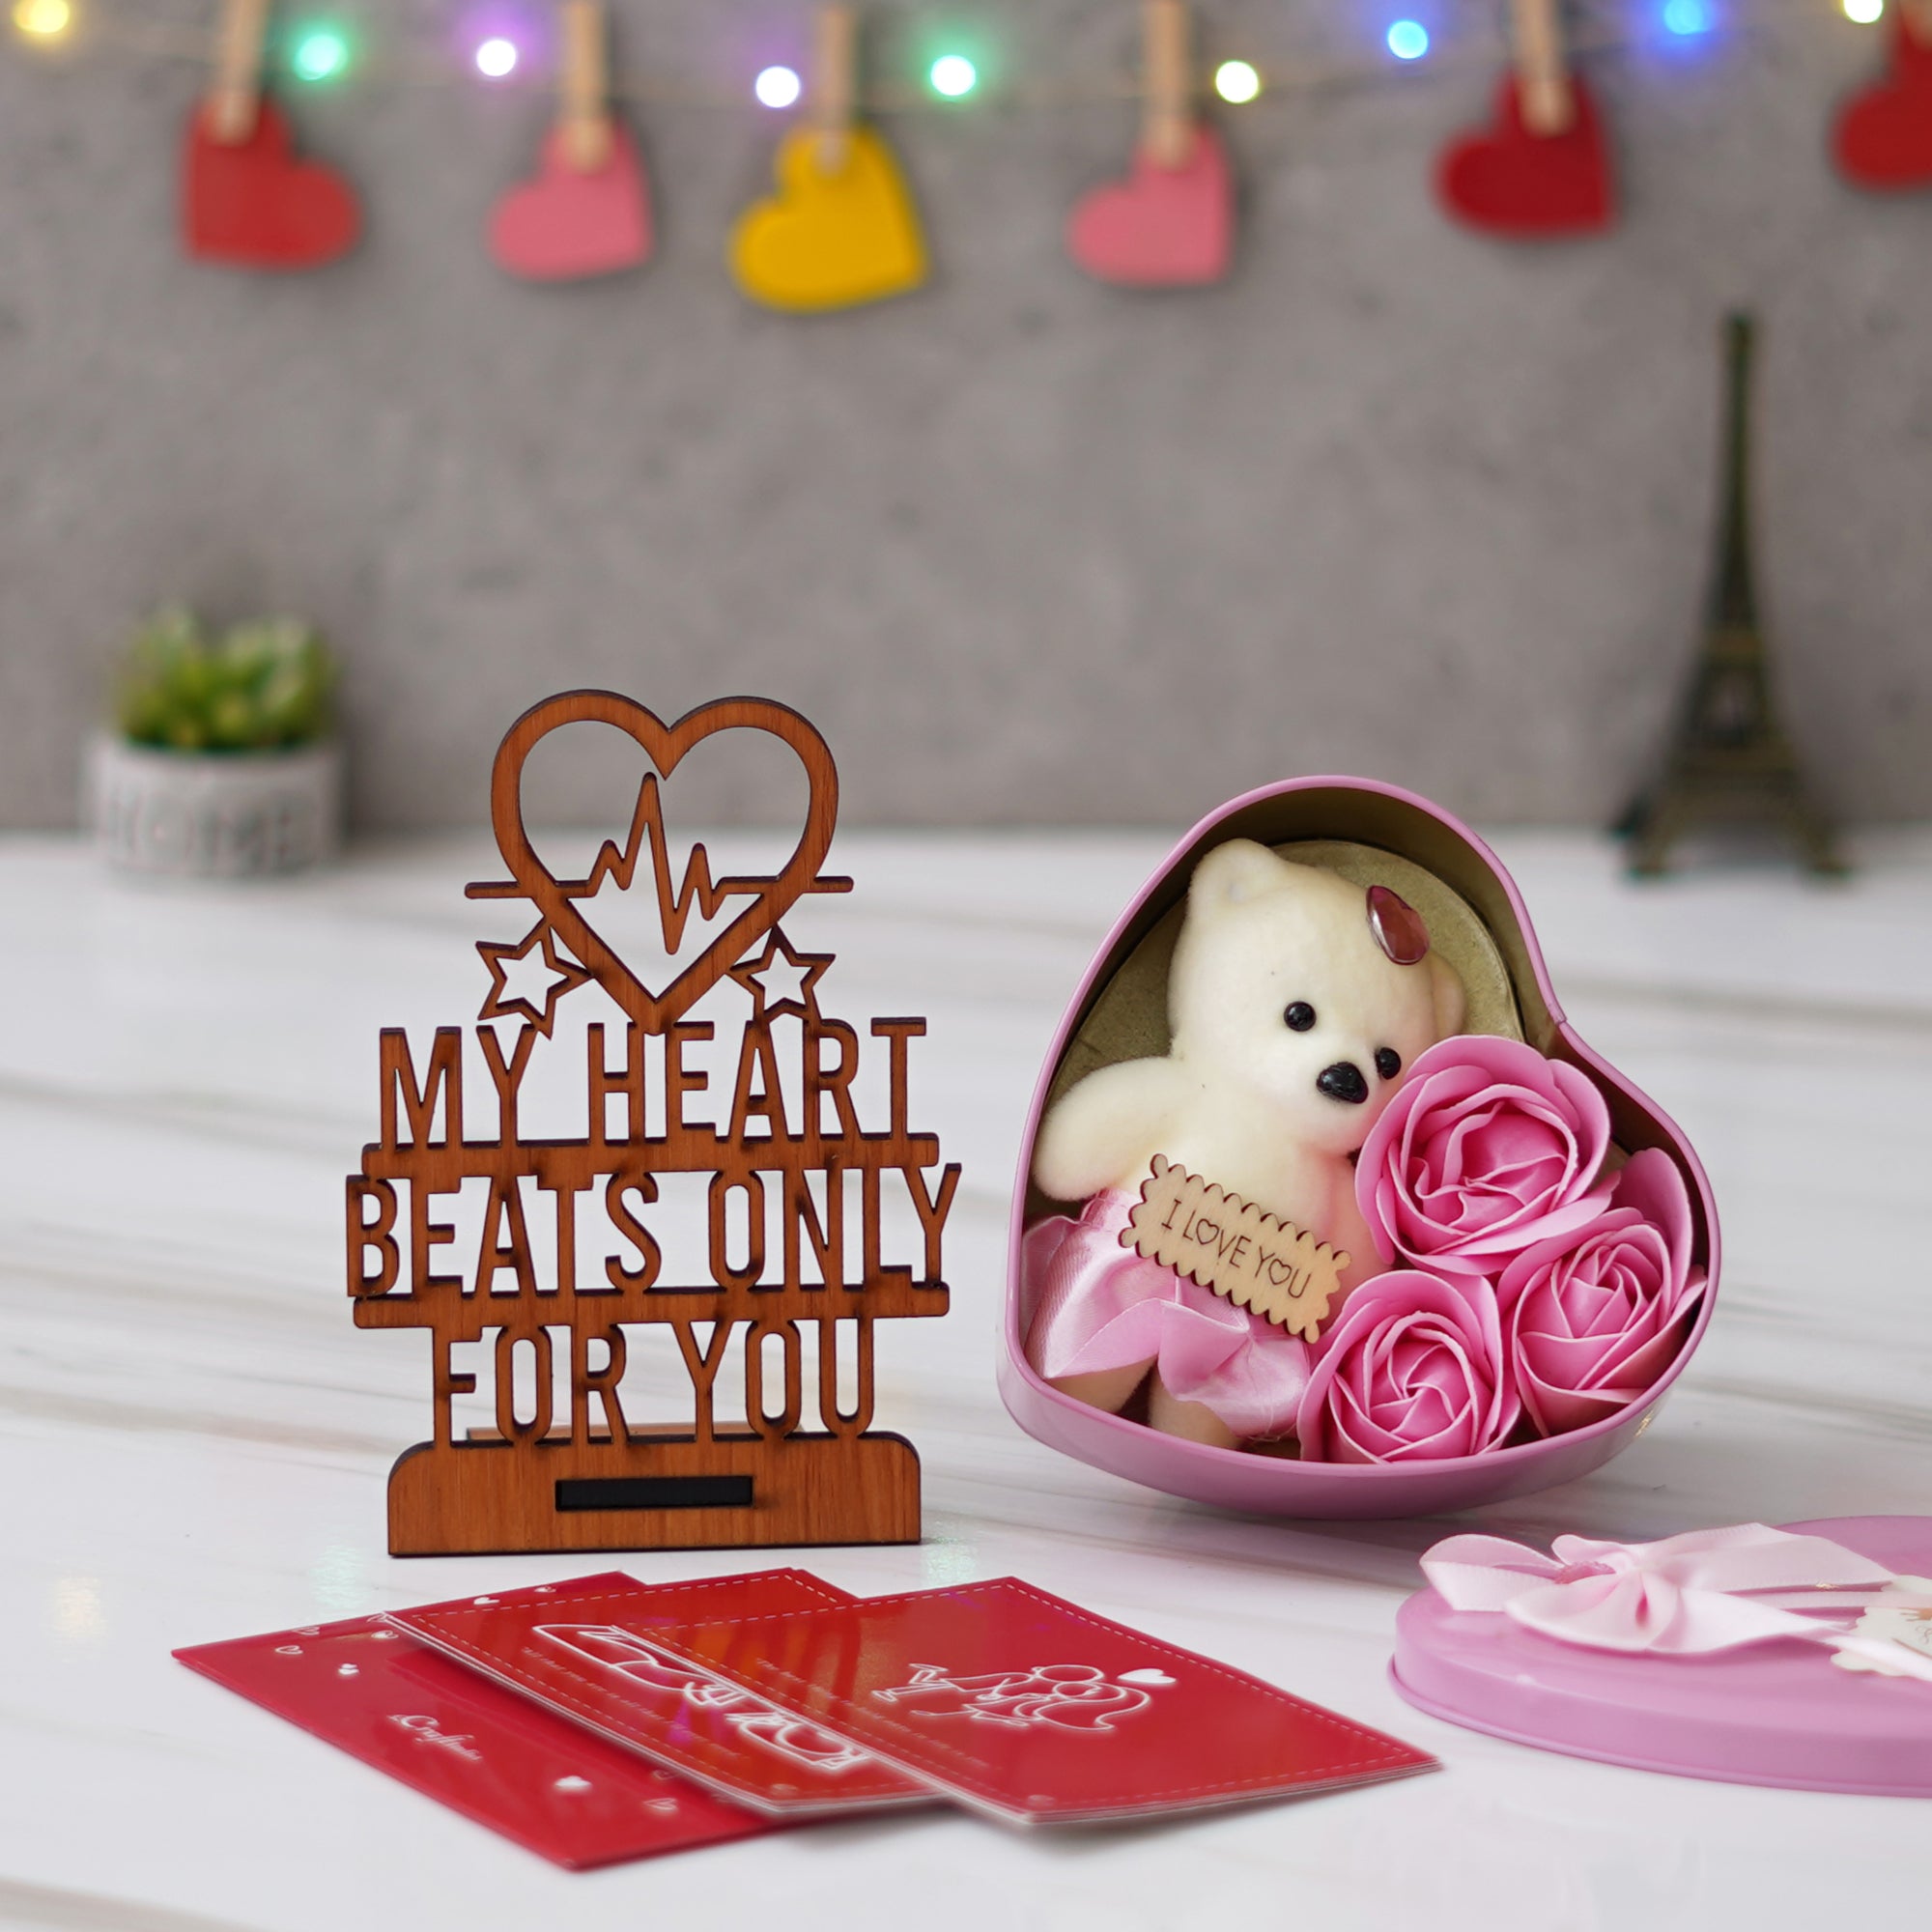 Valentine Combo of Pack of 8 Love Gift Cards, "My Heart Beats Only For You" Wooden Showpiece With Stand, Pink Heart Shaped Gift Box with Teddy and Roses